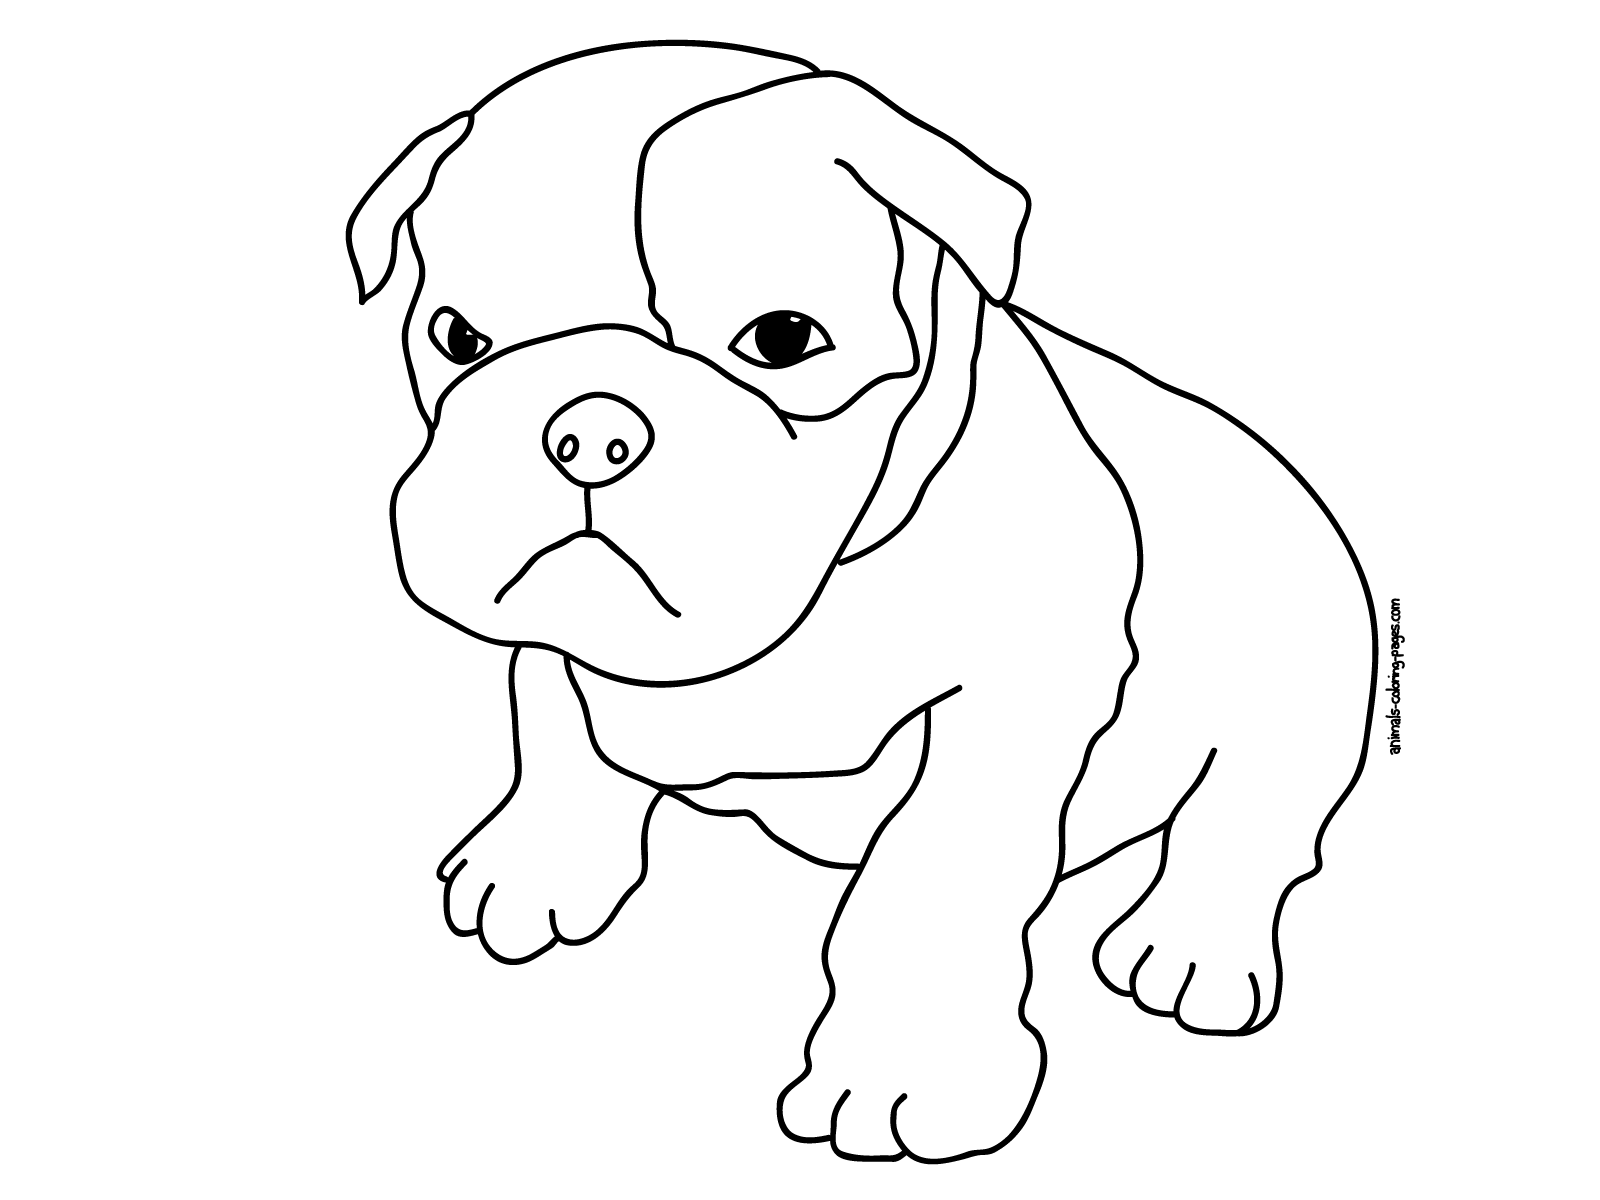 21 Free Pictures for: Pitbull Coloring Pages. Temoon.us